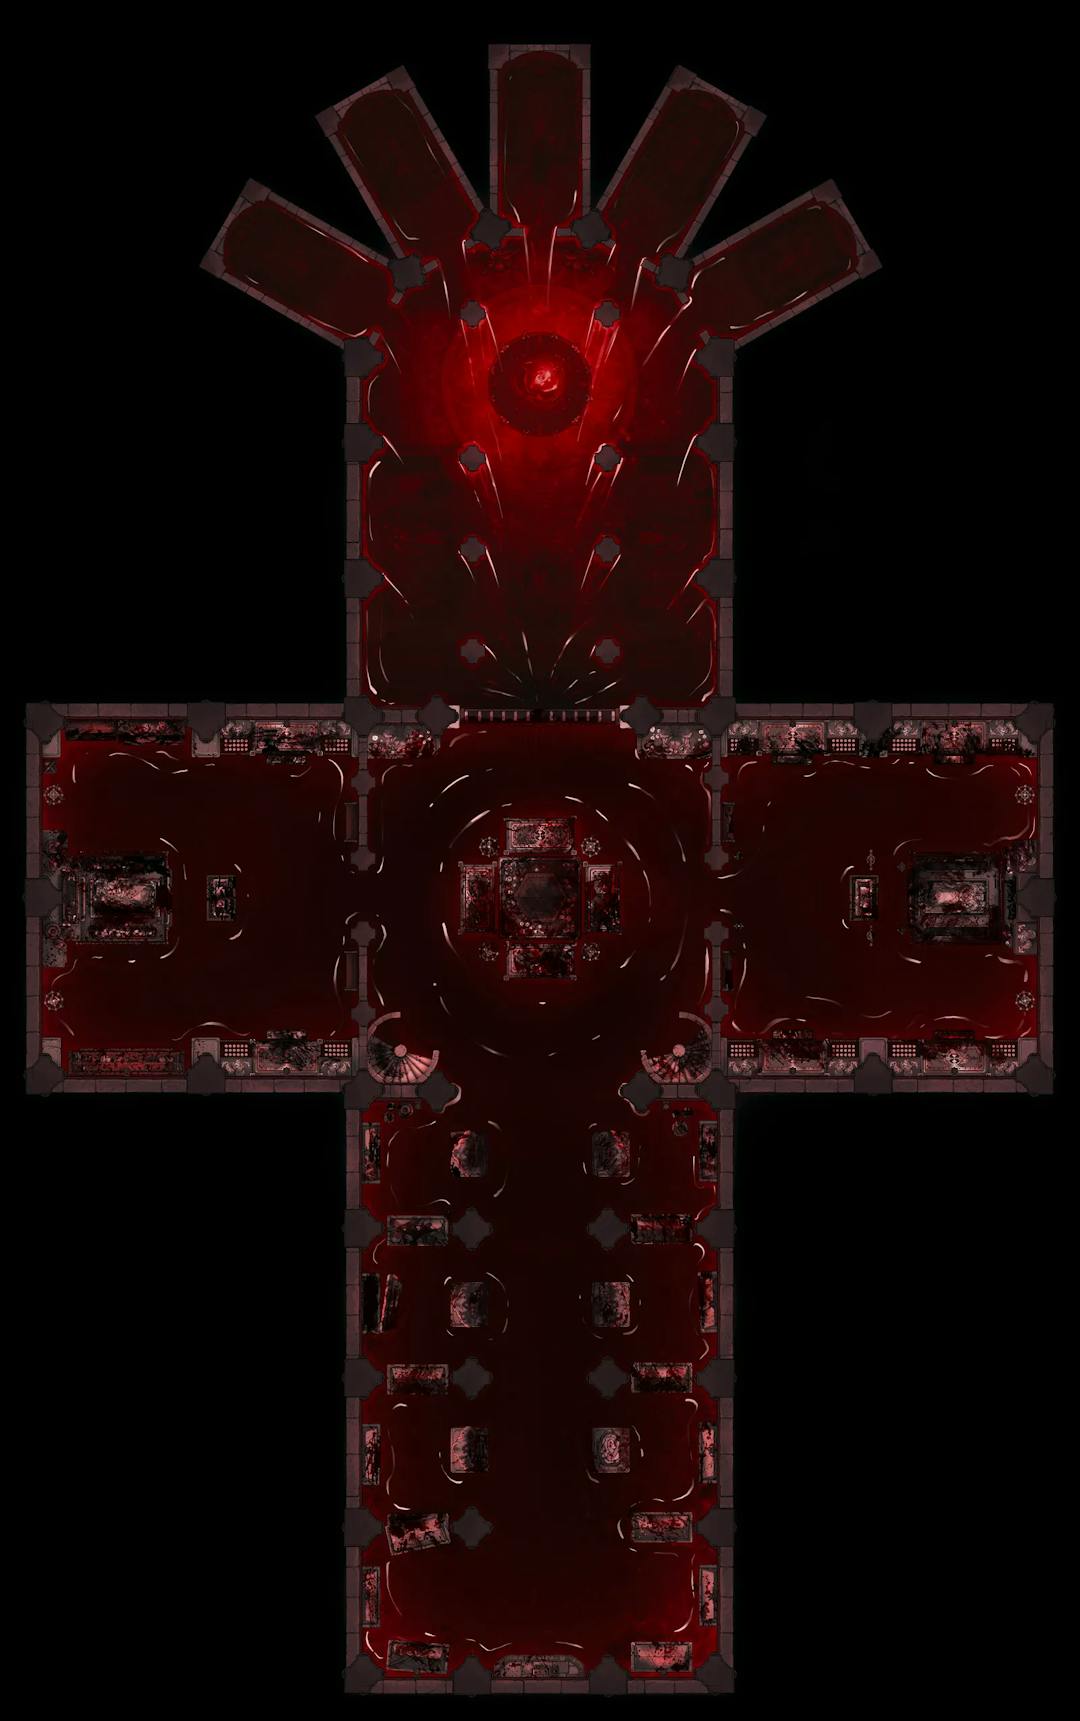 Grand Cathedral Crypt map, Blood Flood variant